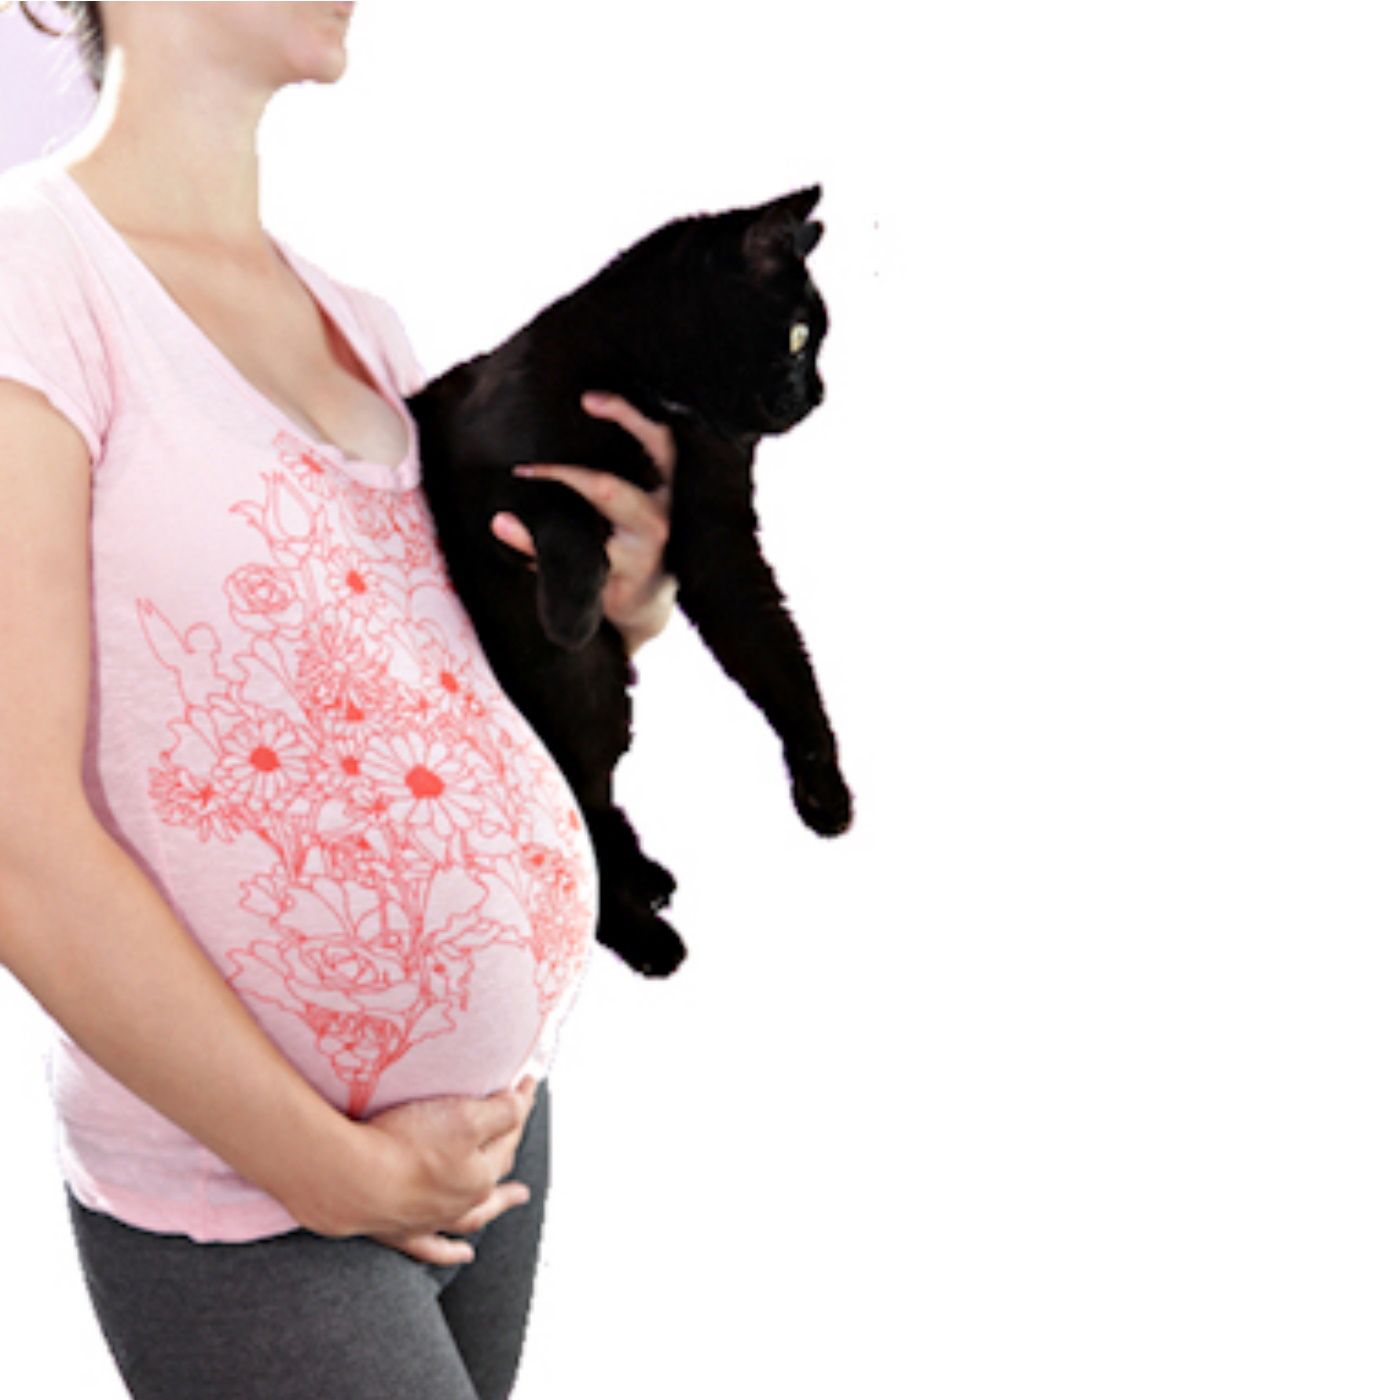 Pregnant? Get Rid Of The Cat! (True or False?) - Dr Jo Sillince